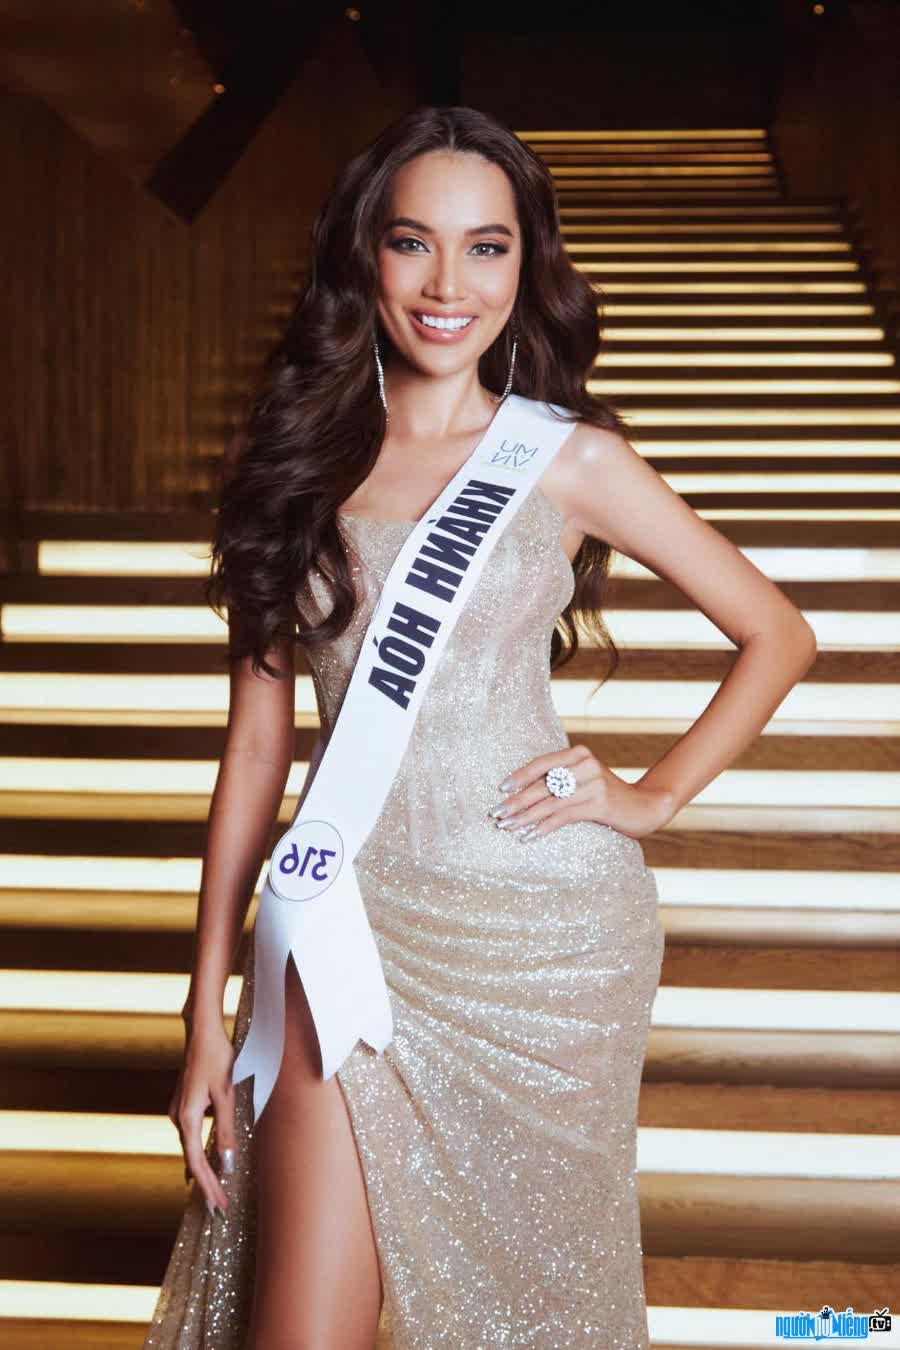  Latest pictures of hotgirl Le Hoang Phuong in the Miss Universe 2022 contest 